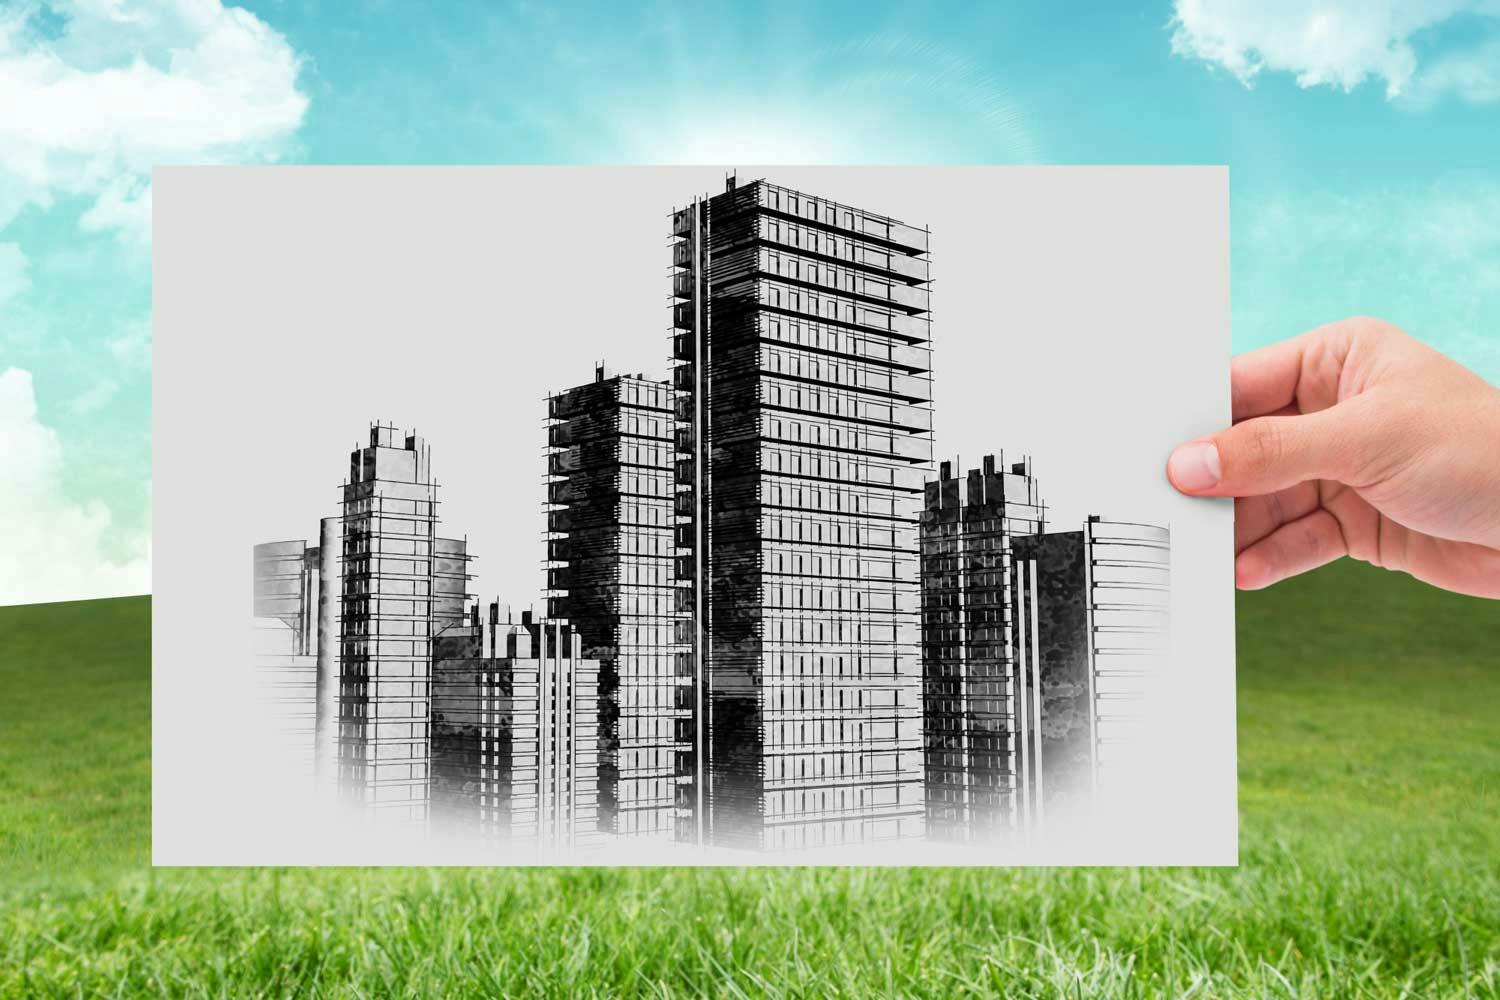 Why invest in real estate in India?